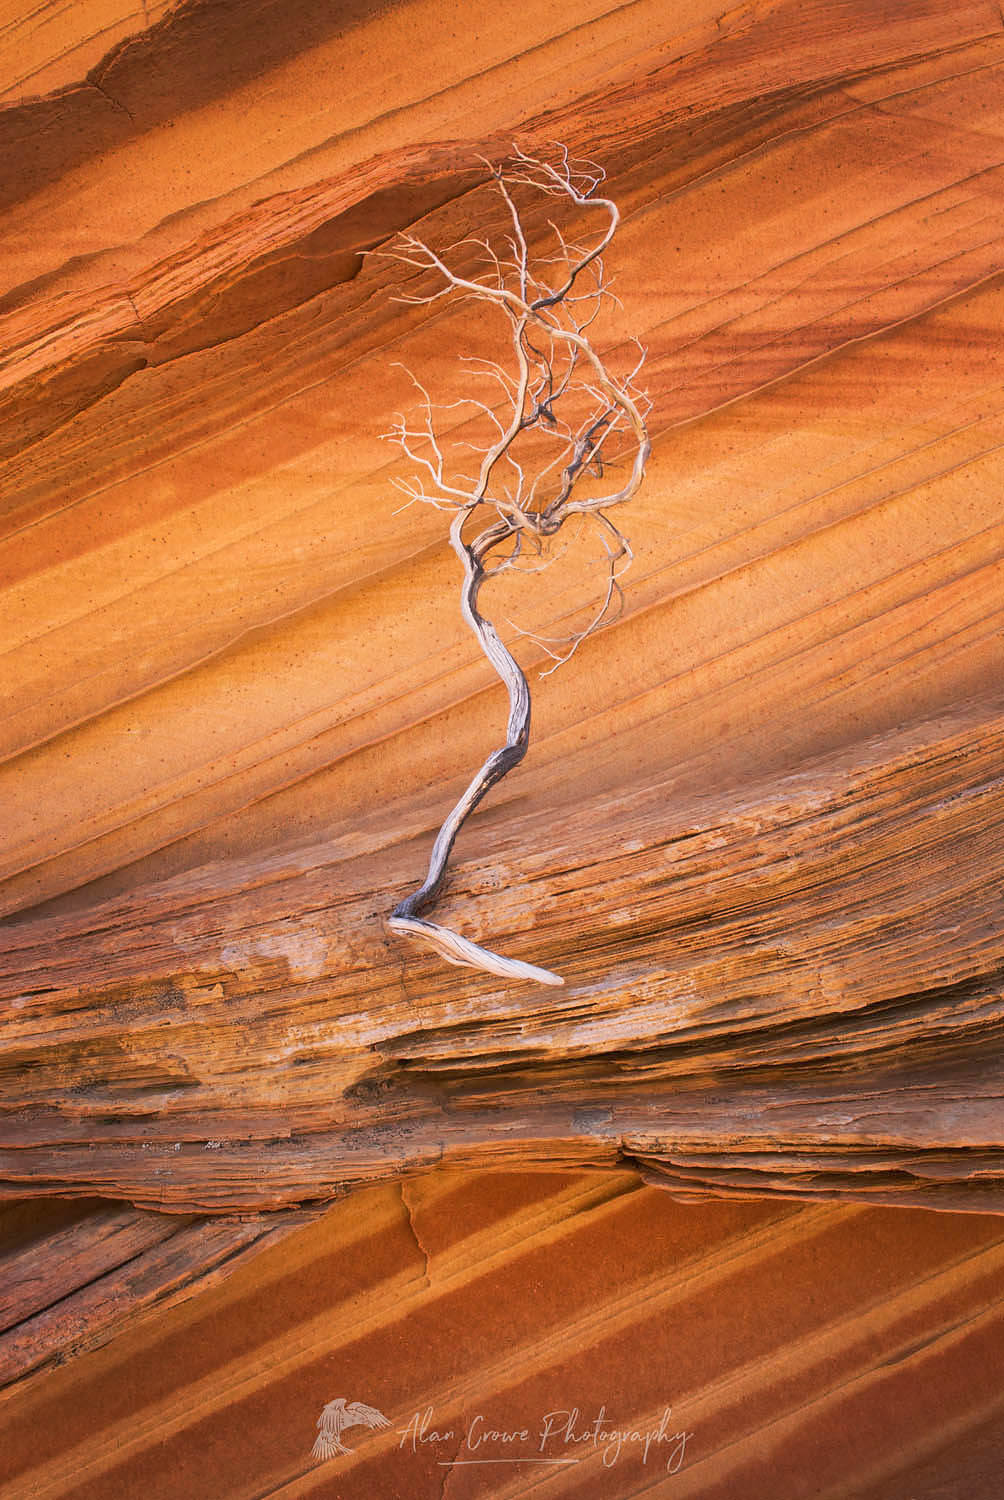 Bleached branch against patterns in layered sandstone, South Coyote Buttes, Vermilion Cliffs Wilderness Arizona #37633